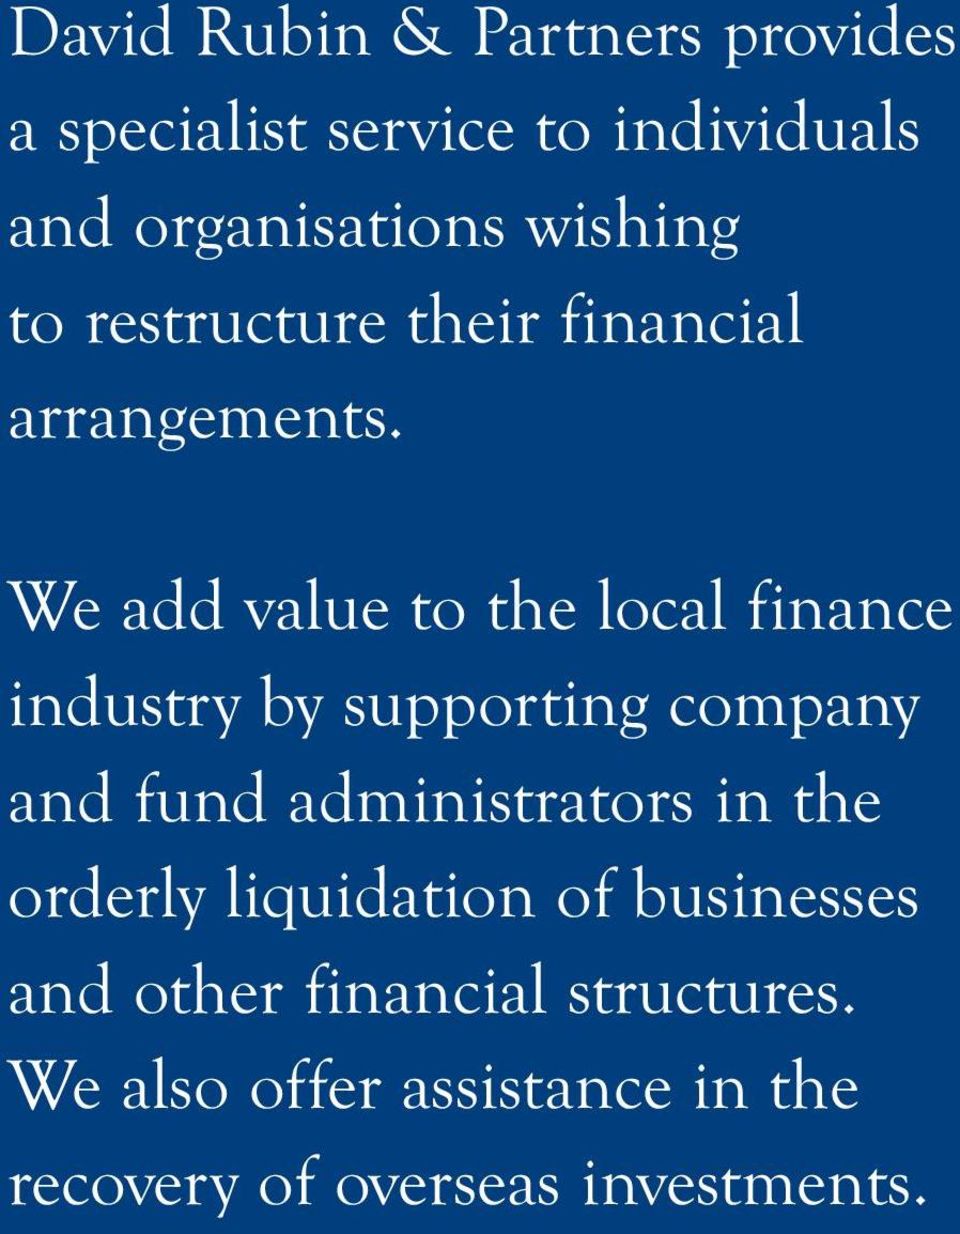 We add value to the local finance industry by supporting company and fund administrators in